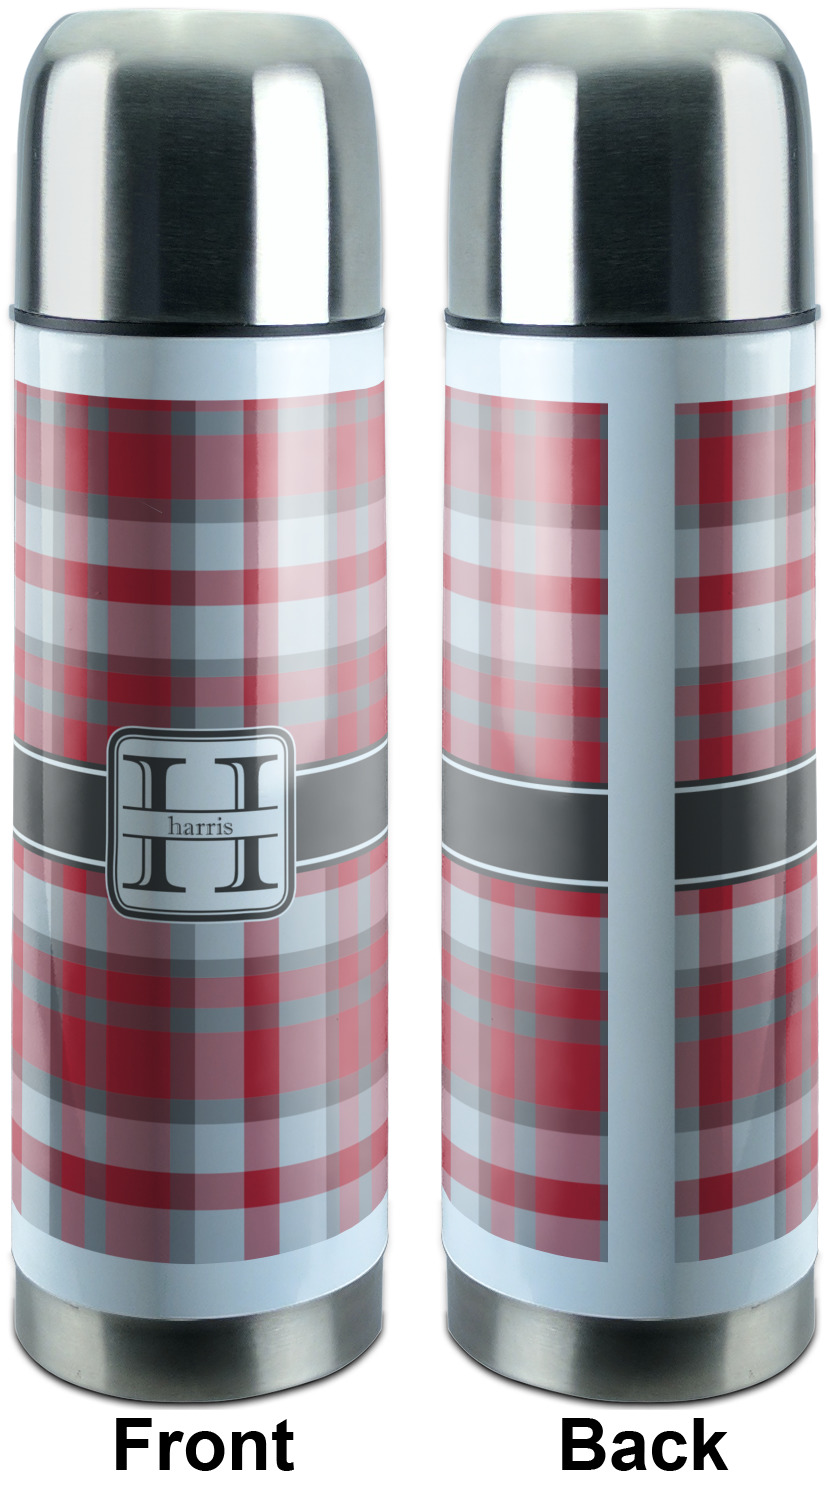 https://www.youcustomizeit.com/common/MAKE/193555/Red-Gray-Plaid-Thermos-Apvl.jpg?lm=1666202760